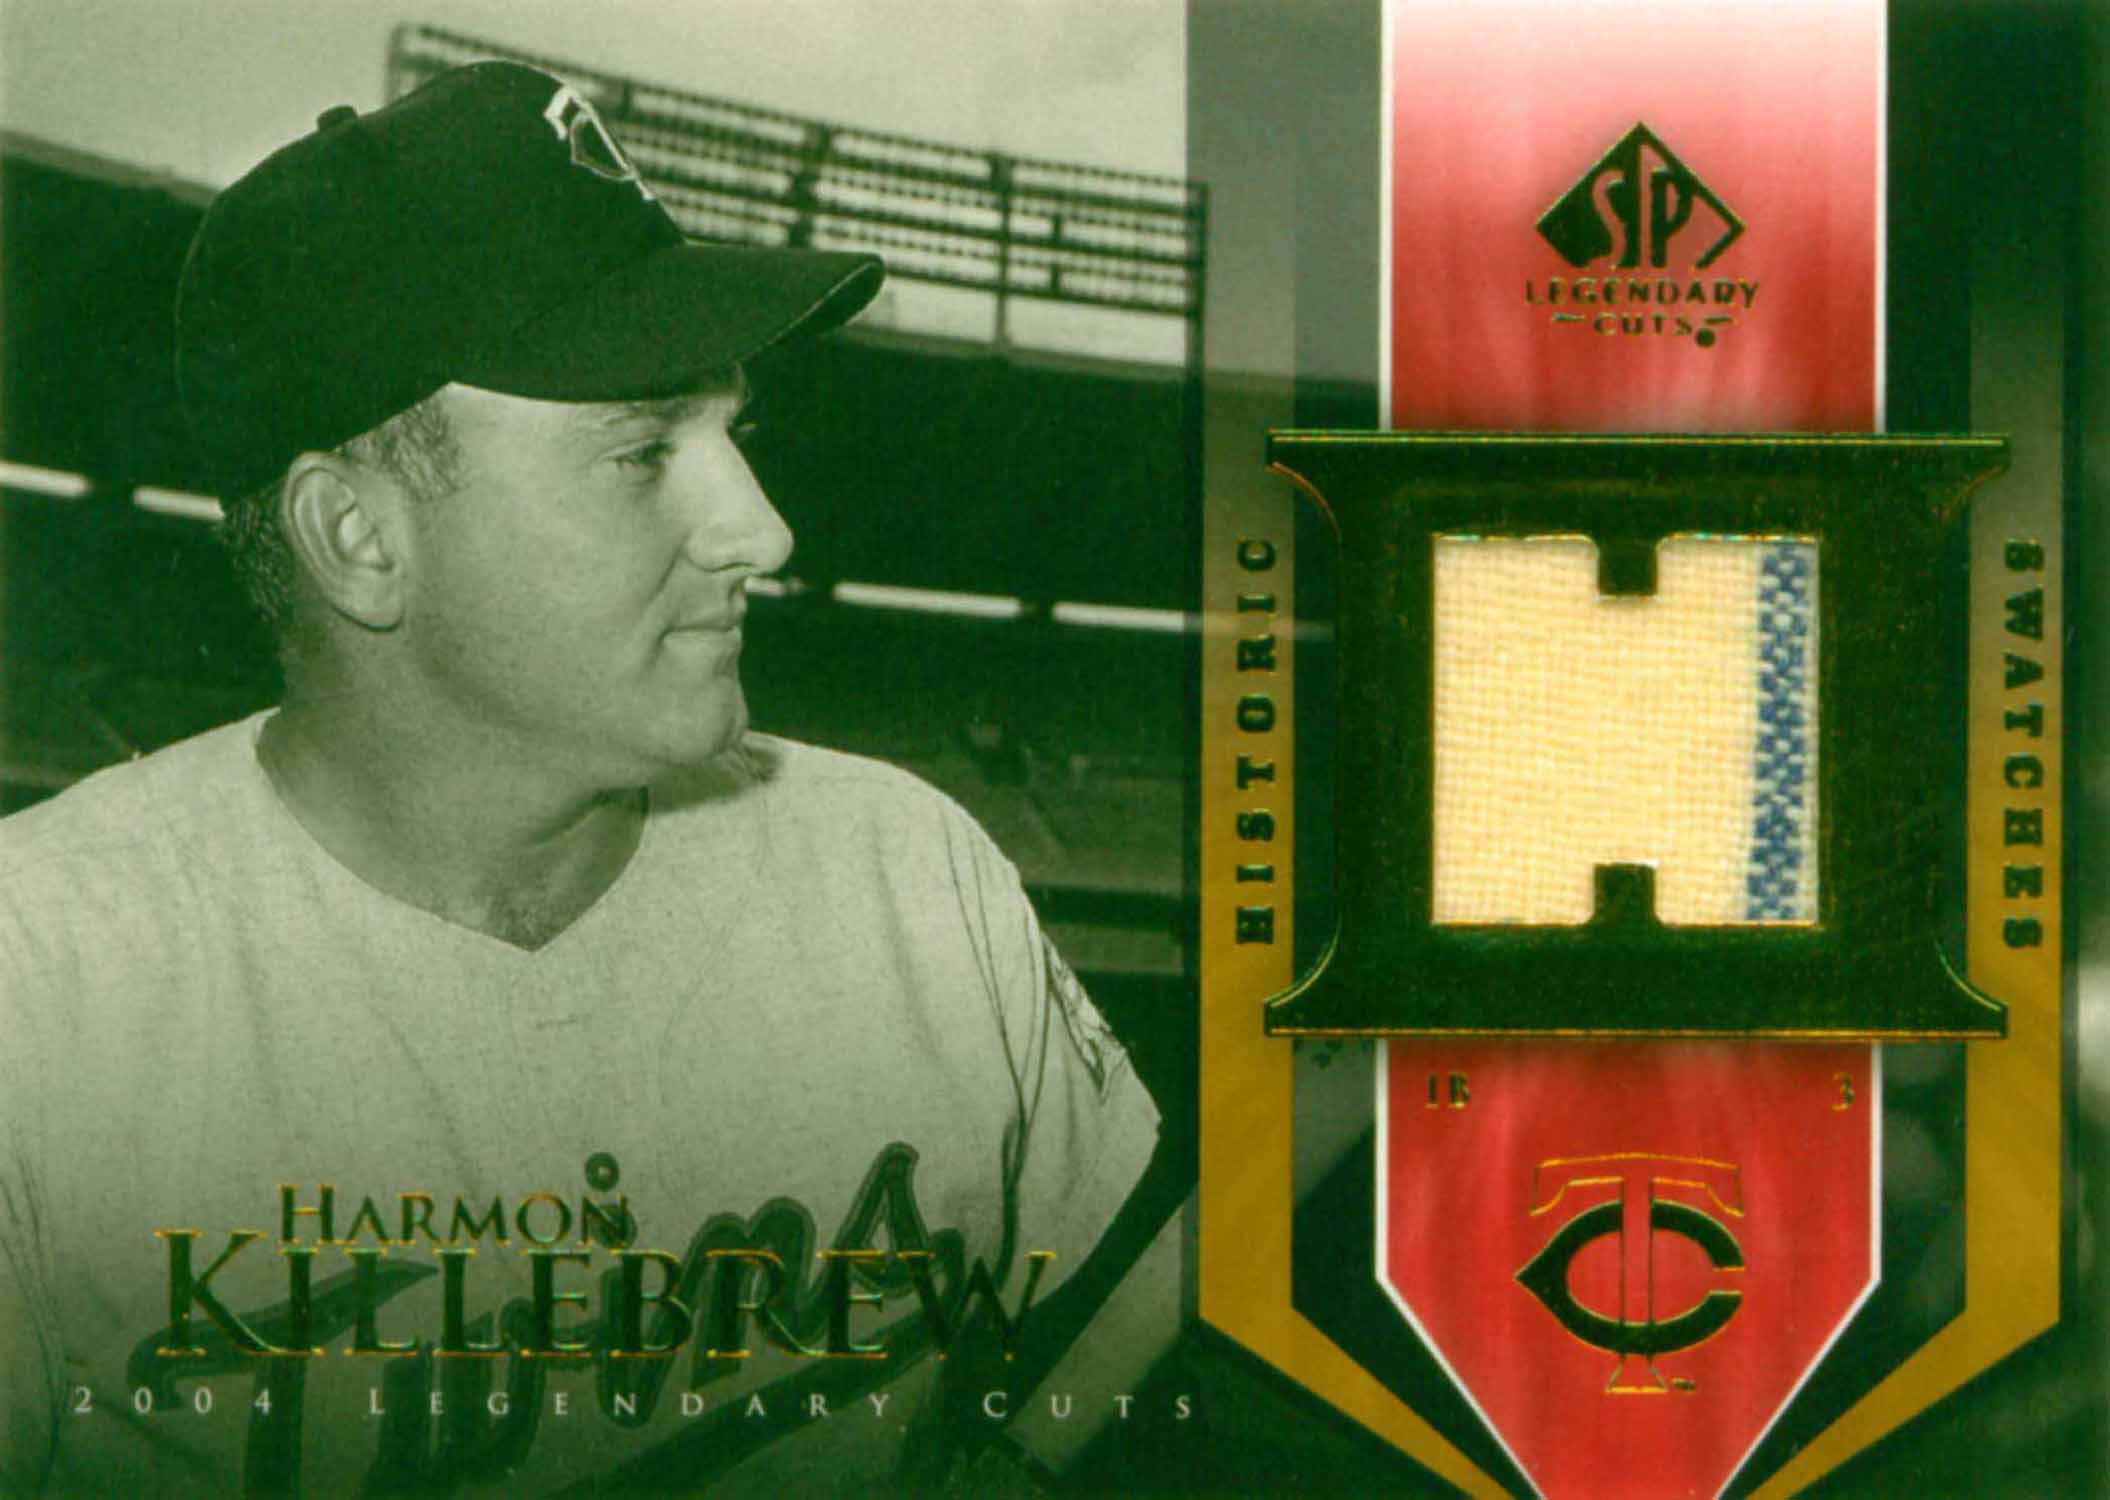 2004 SP Legendary Cuts Historic Swatches Jersey